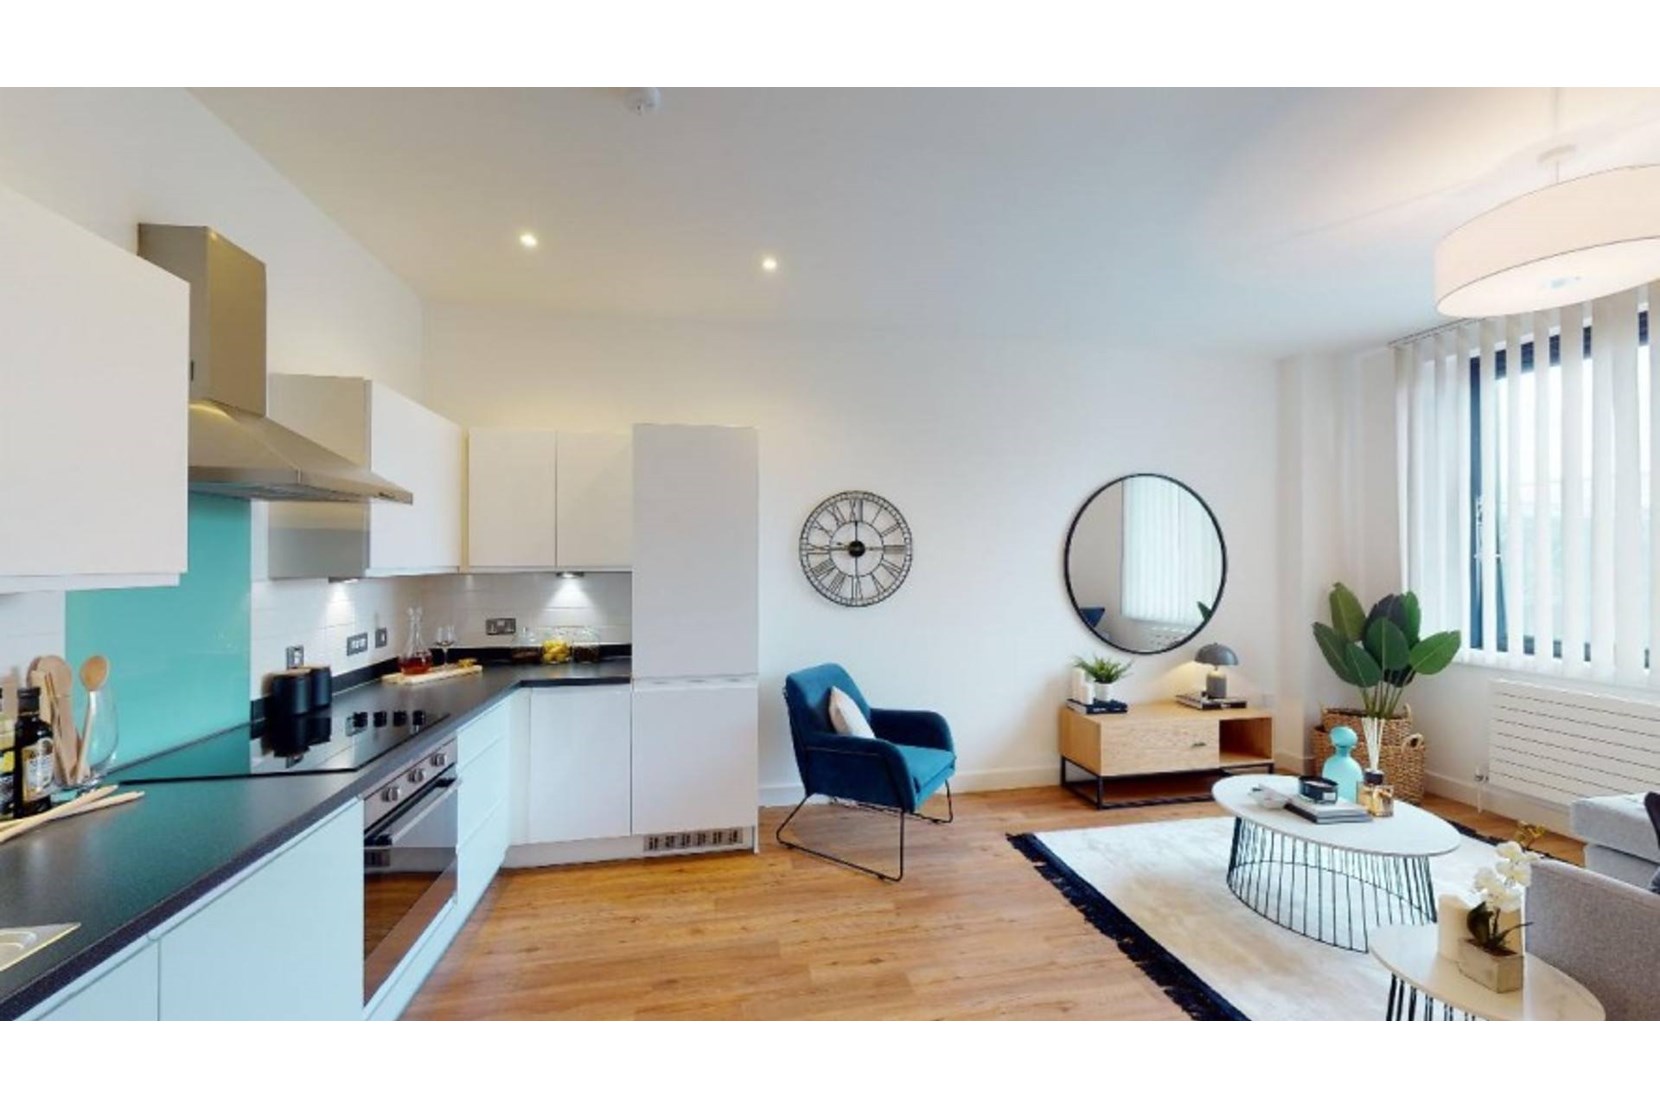 Apartments to Rent by Allsop at The Keel, Liverpool, L3, kitchen living area